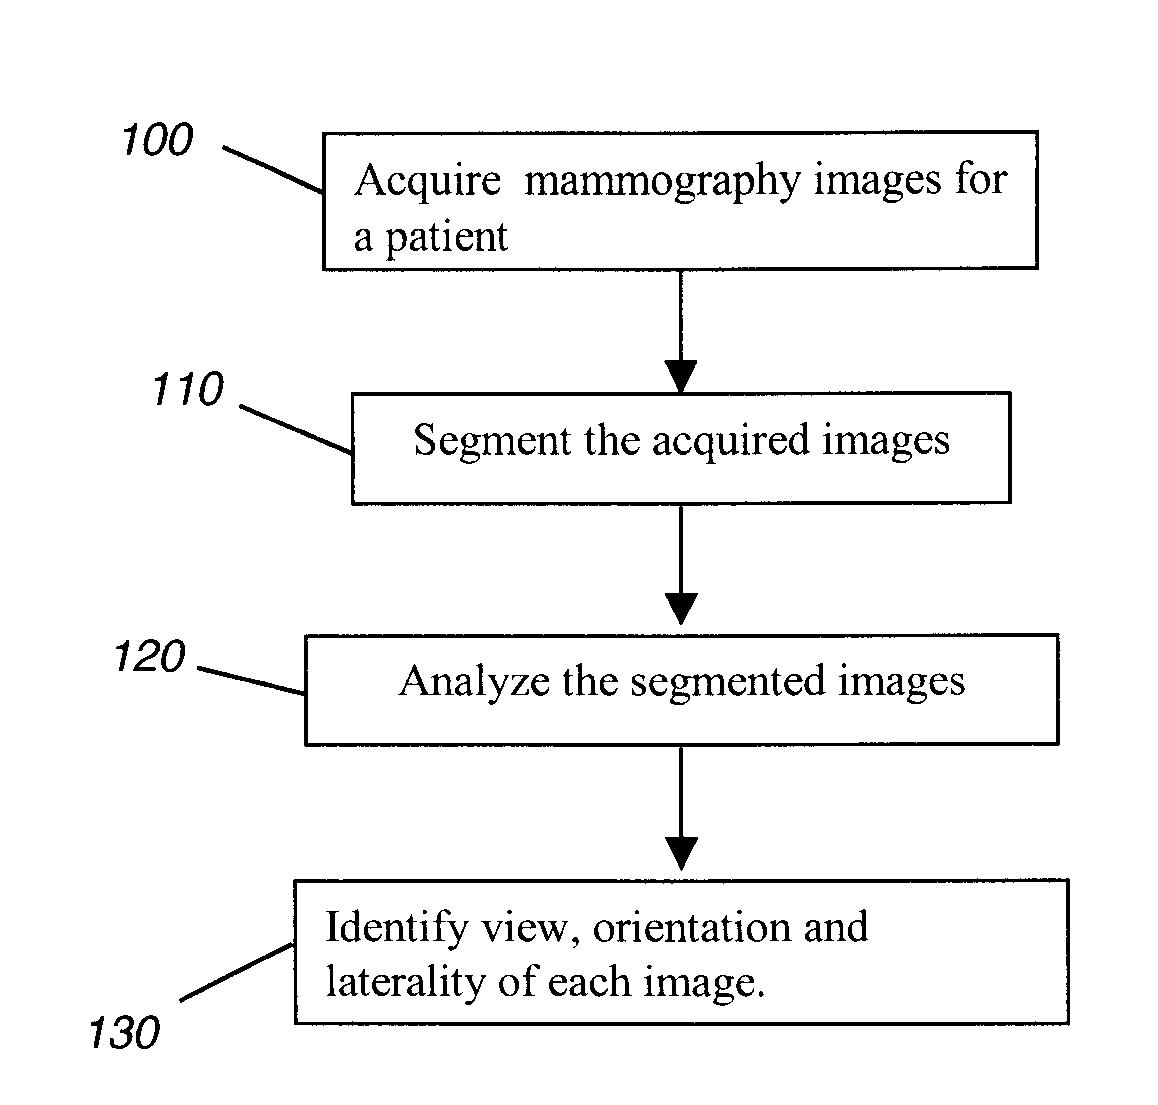 Determining mammographic image view and laterality